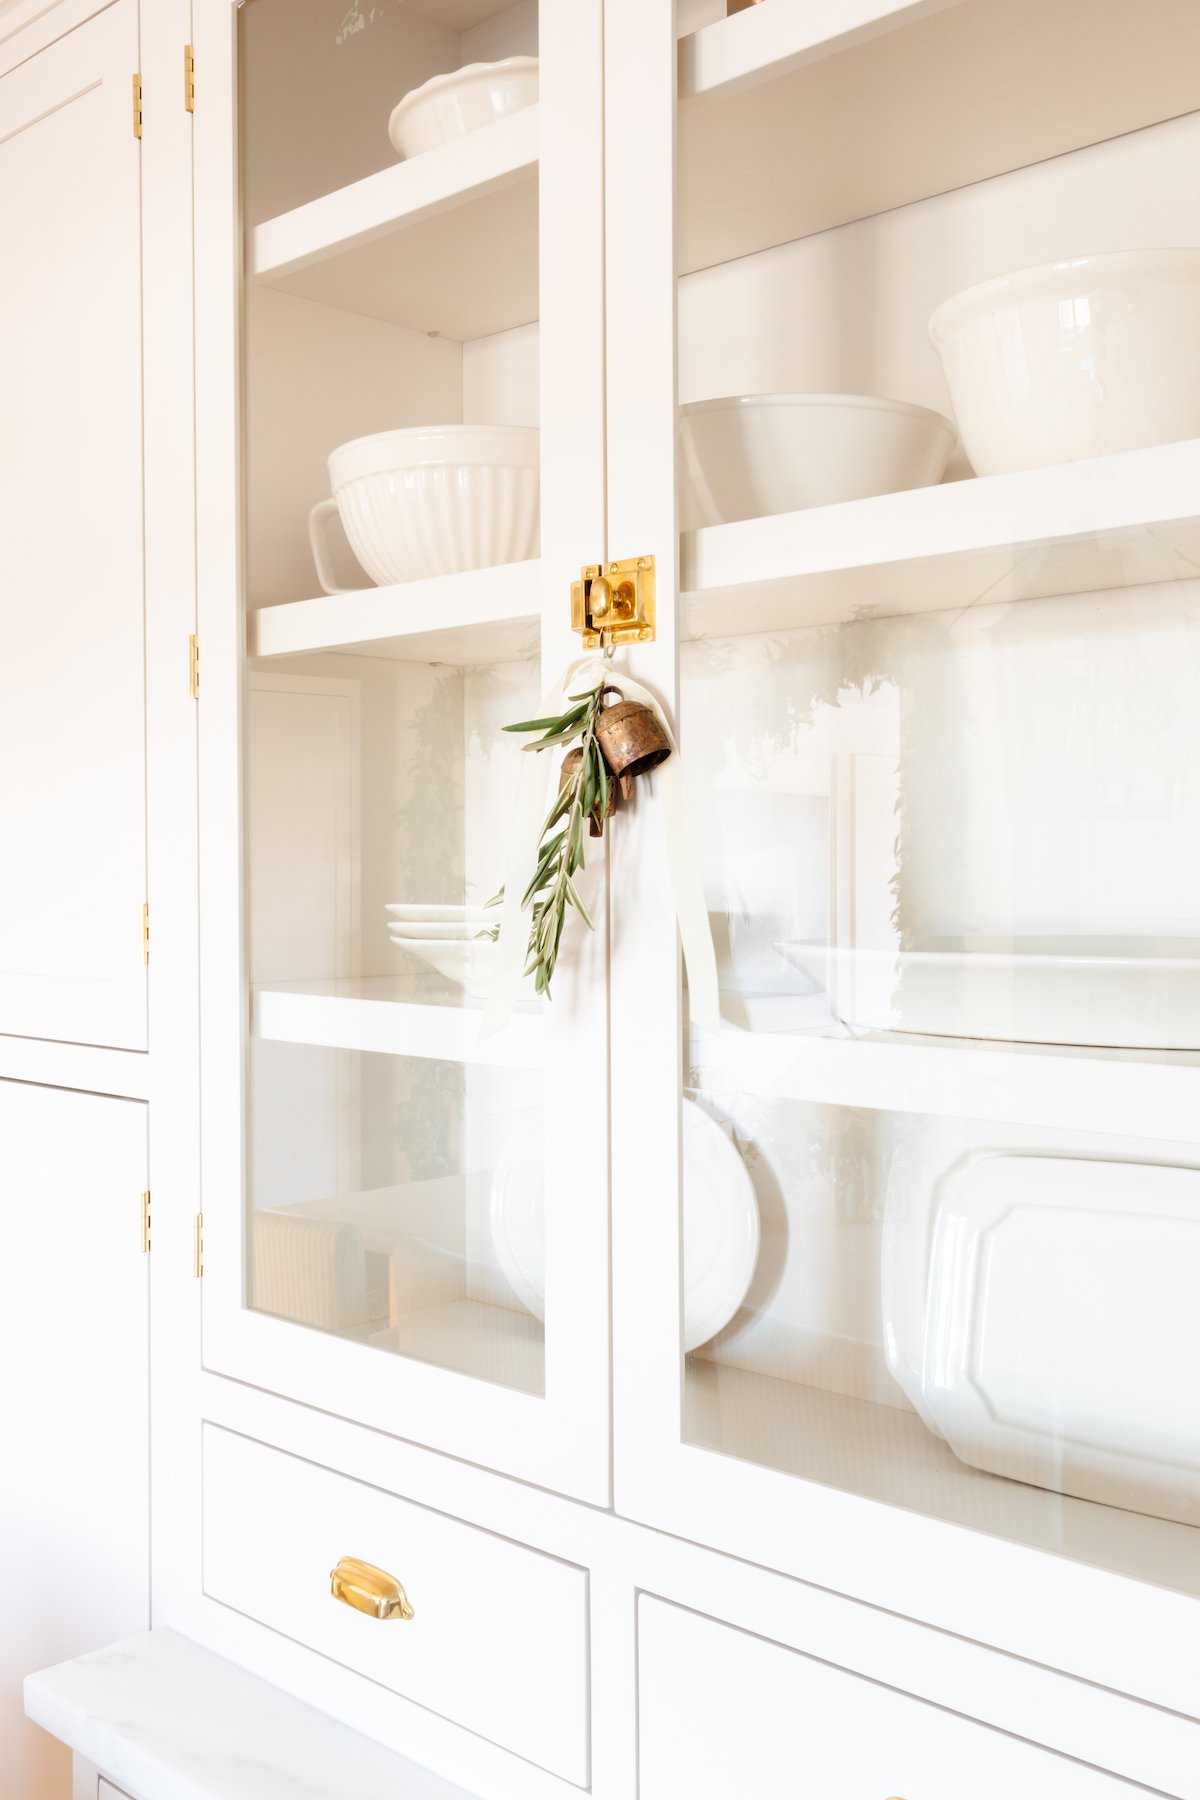 A white china cabinet with gold handles and plates, perfect for adding festive charm to your Christmas house.